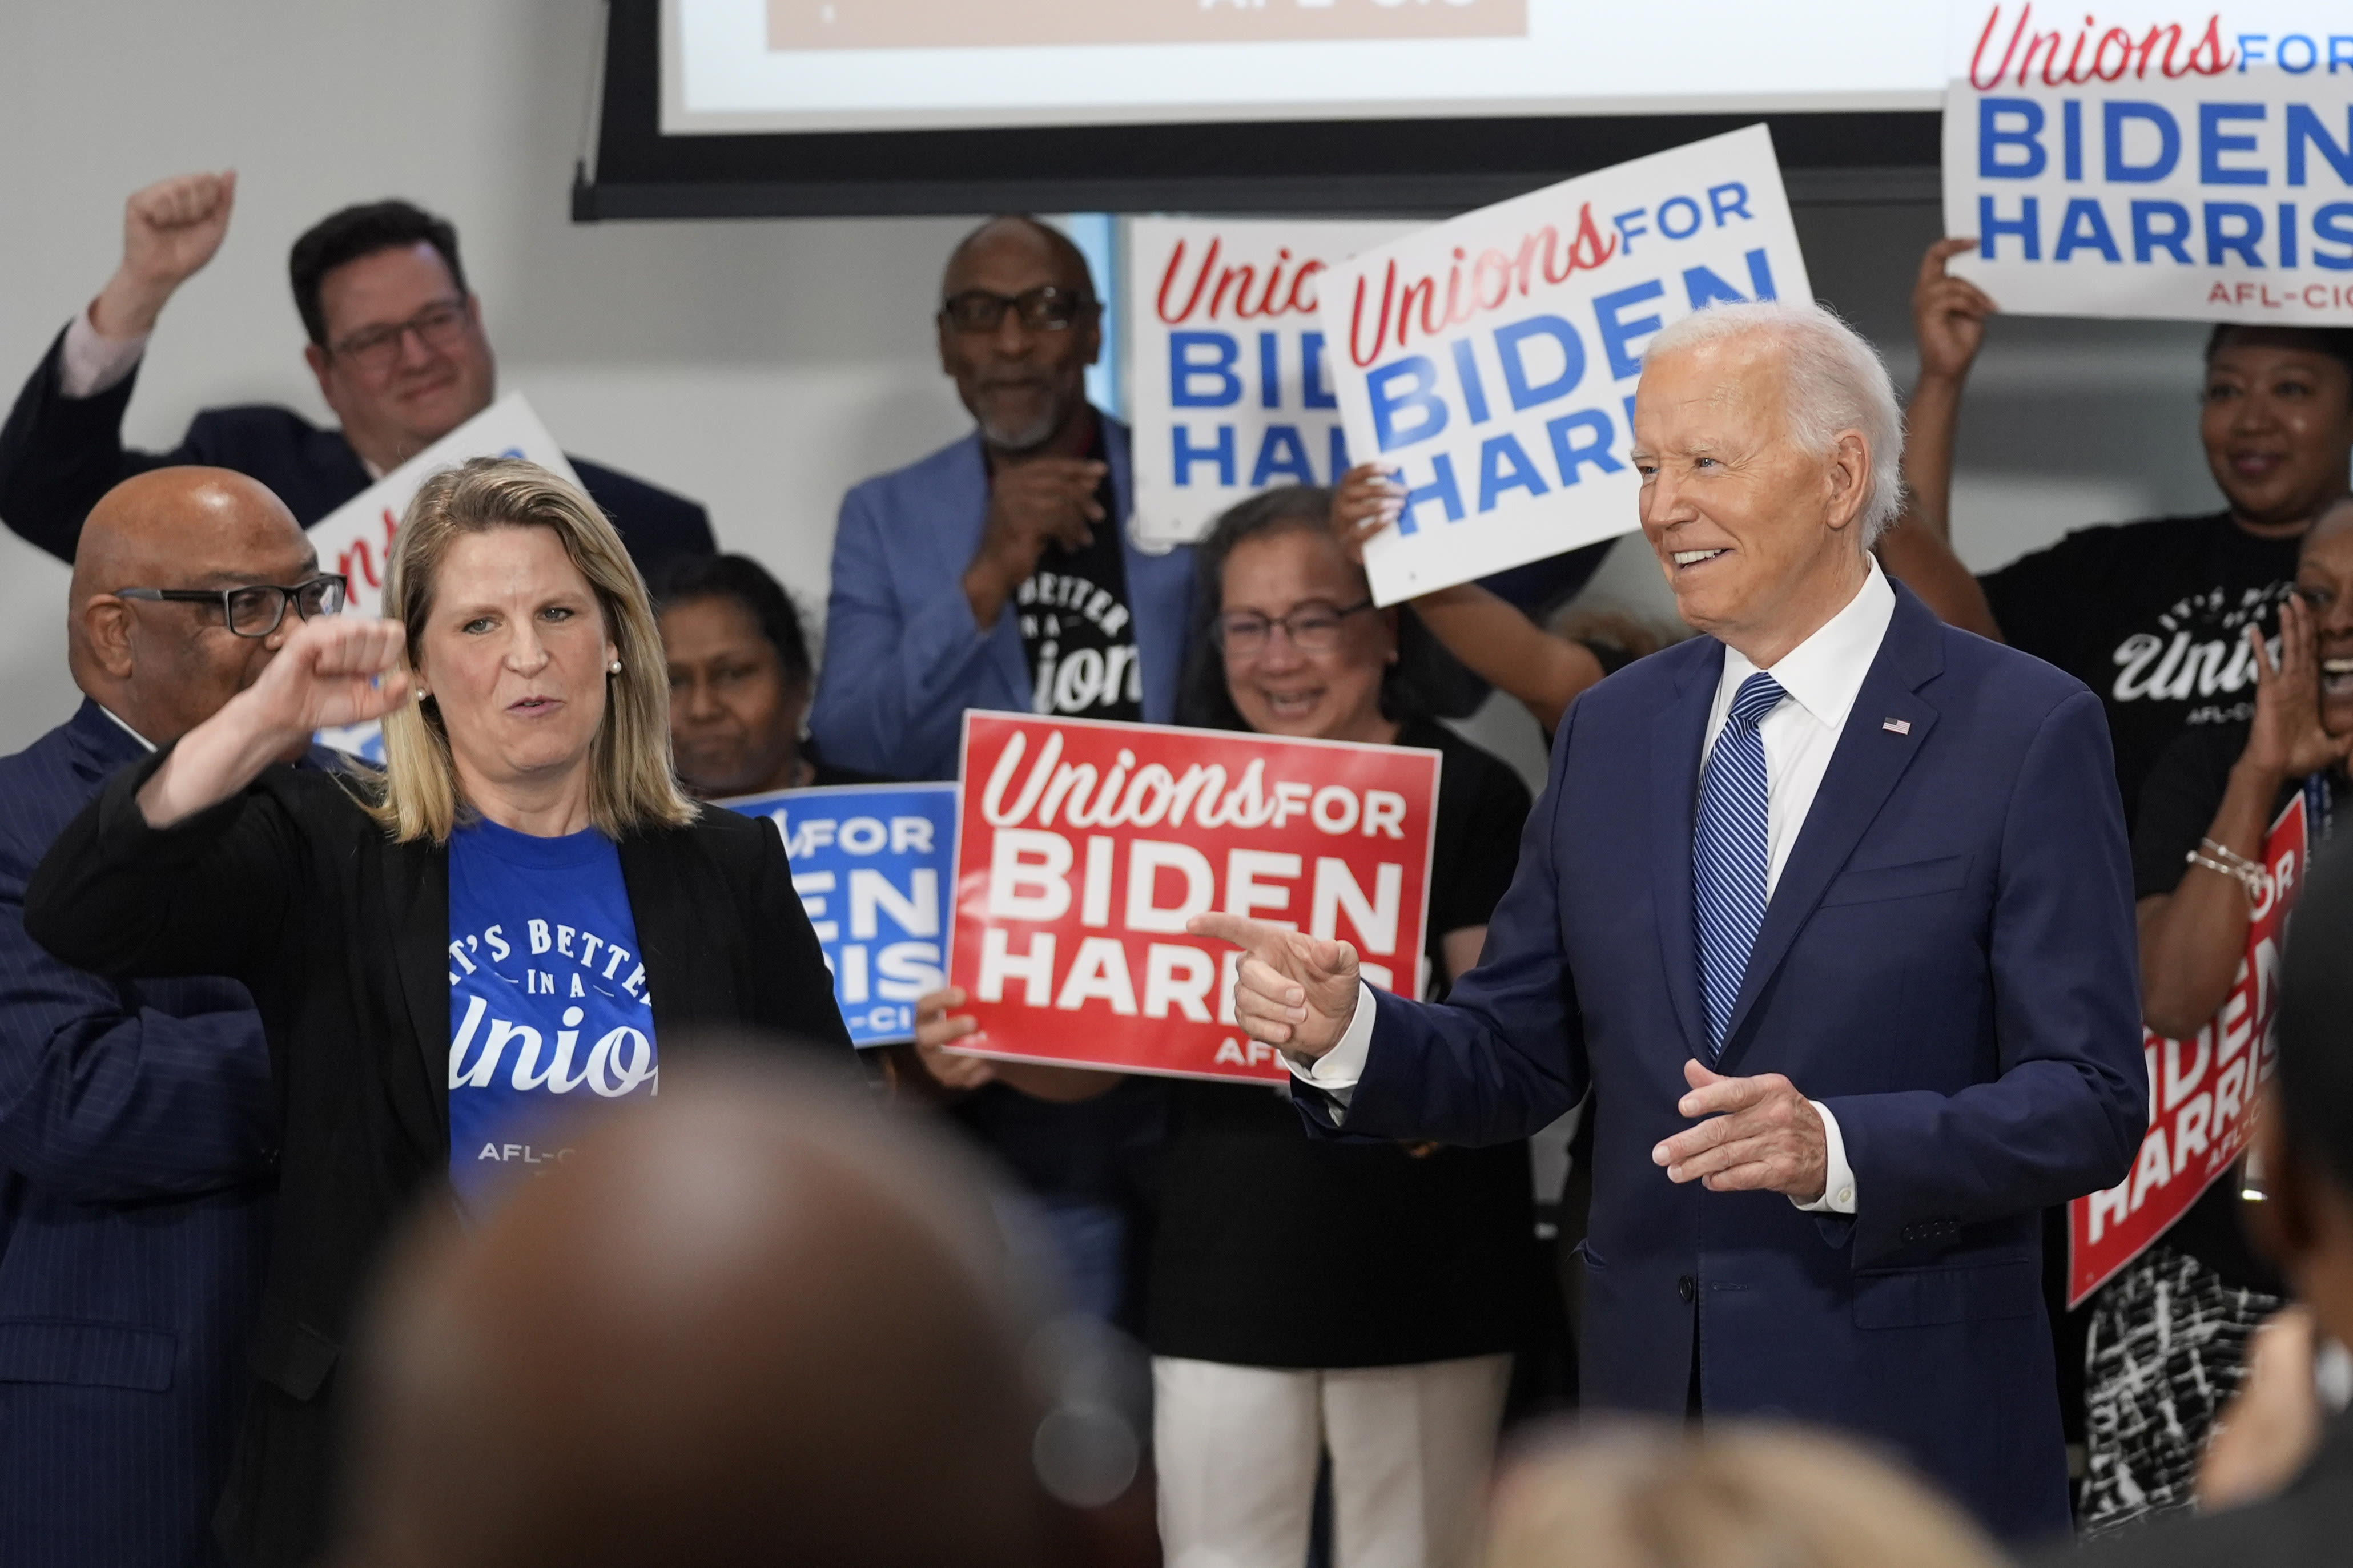 Dems are freaking out about Biden even in once safely blue states